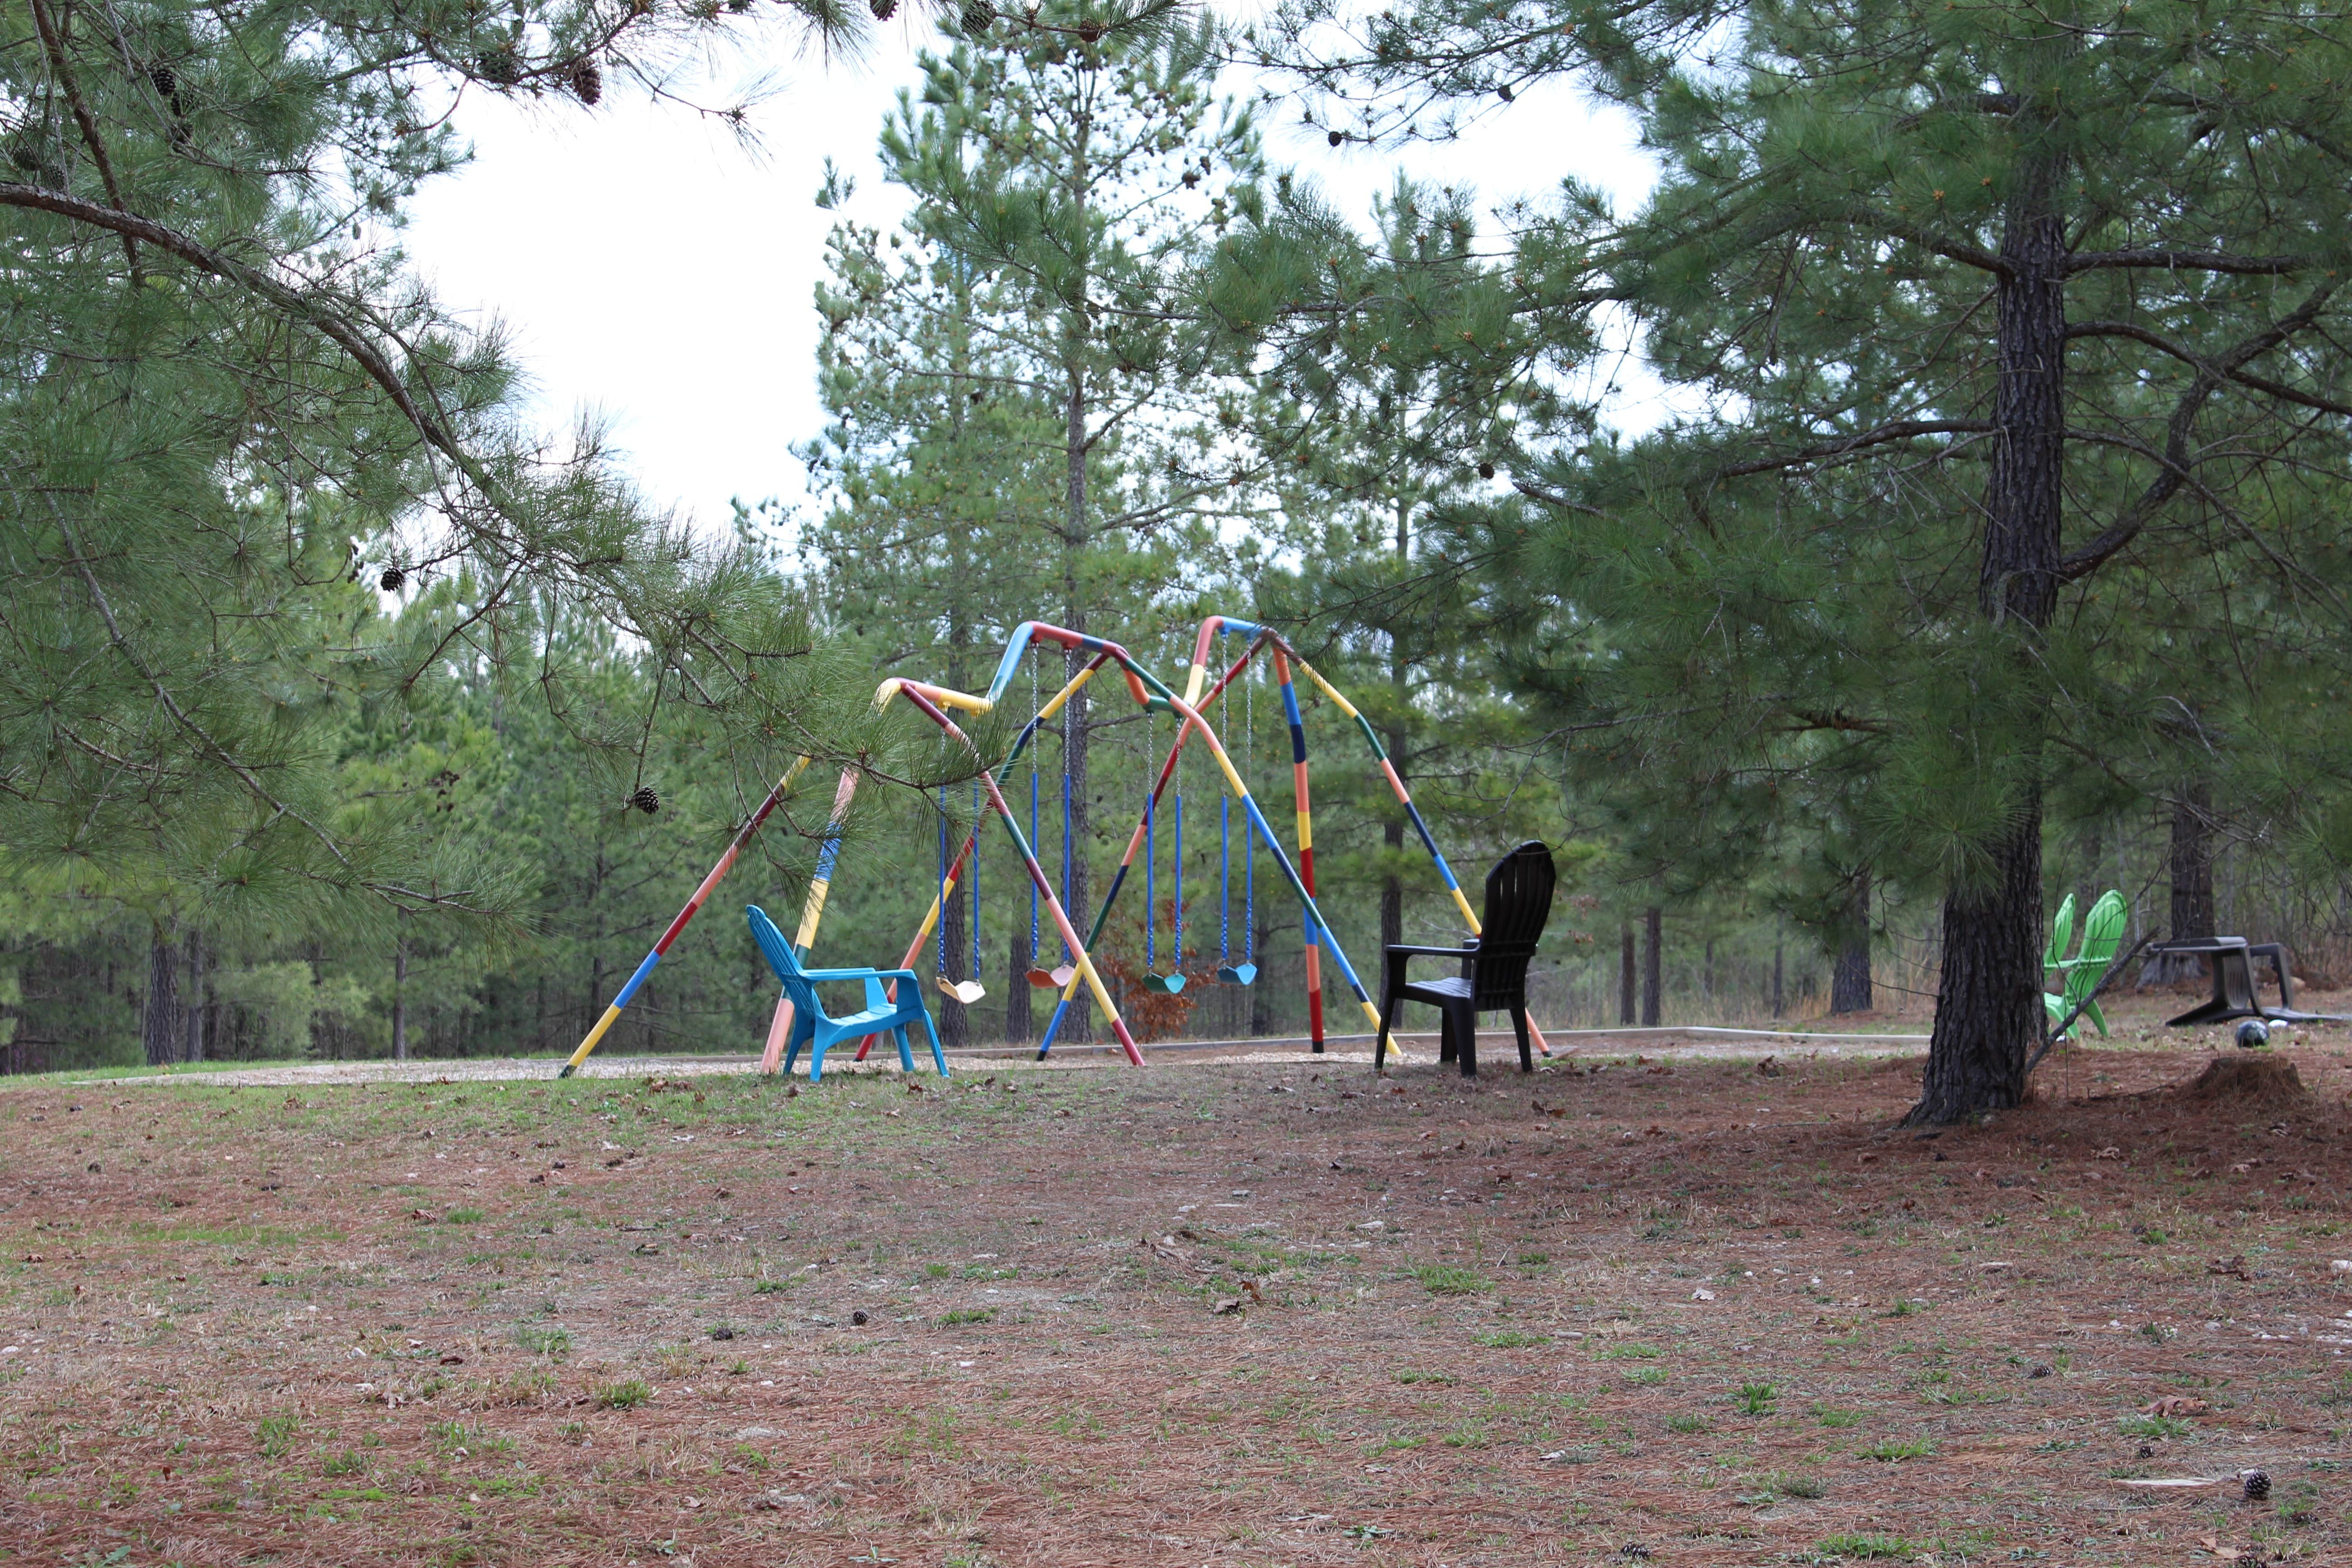 Camper submitted image from Yogi Bear's Jellystone Park at Asheboro - 5